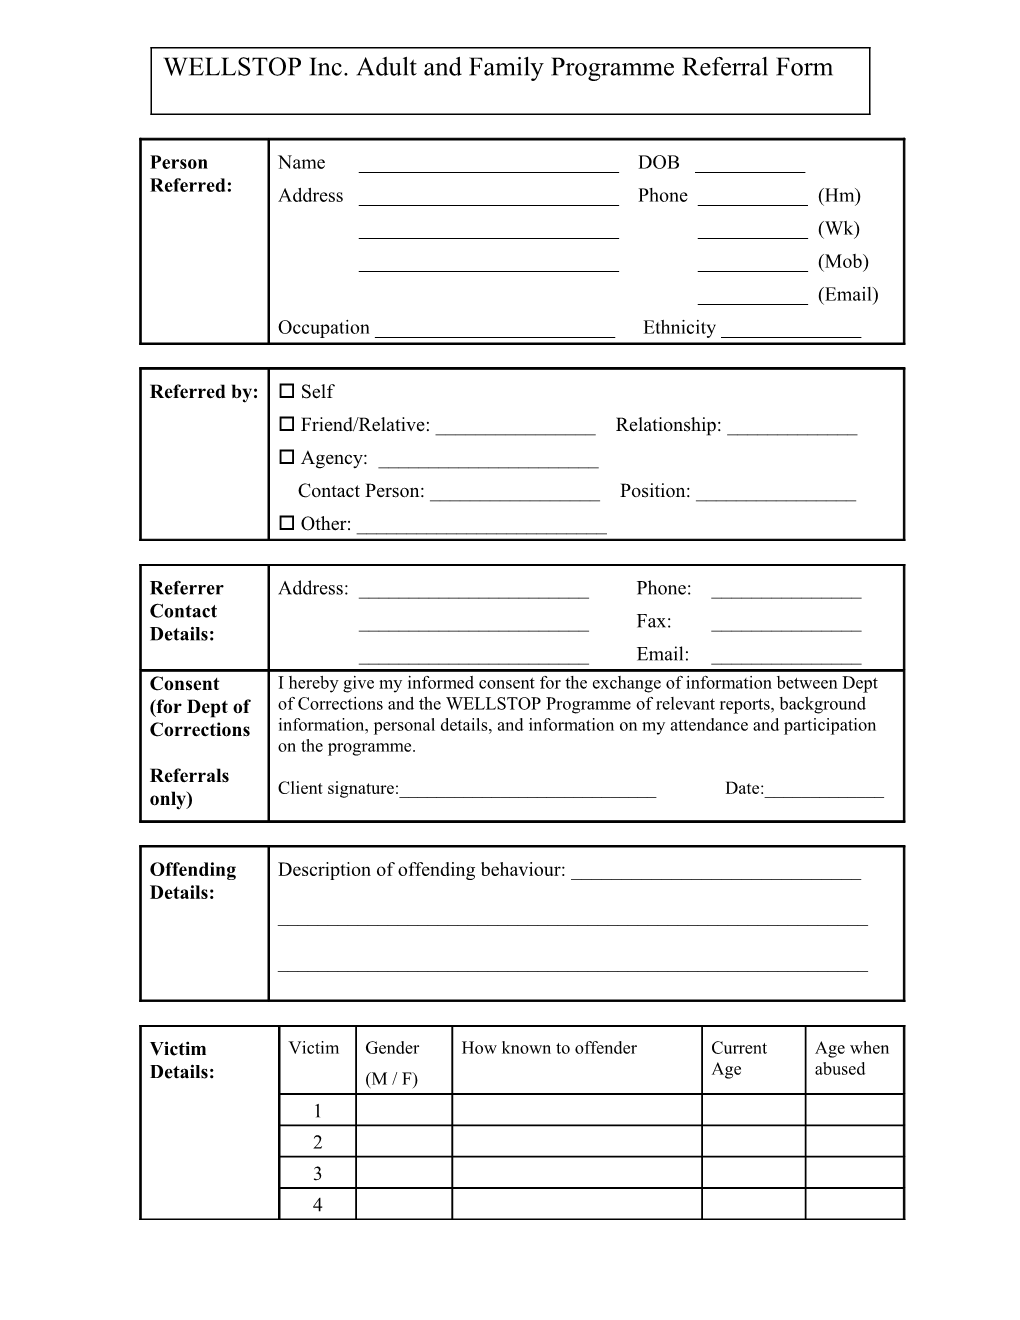 WELLSTOP Inc. Adult and Family Programme Referral Form